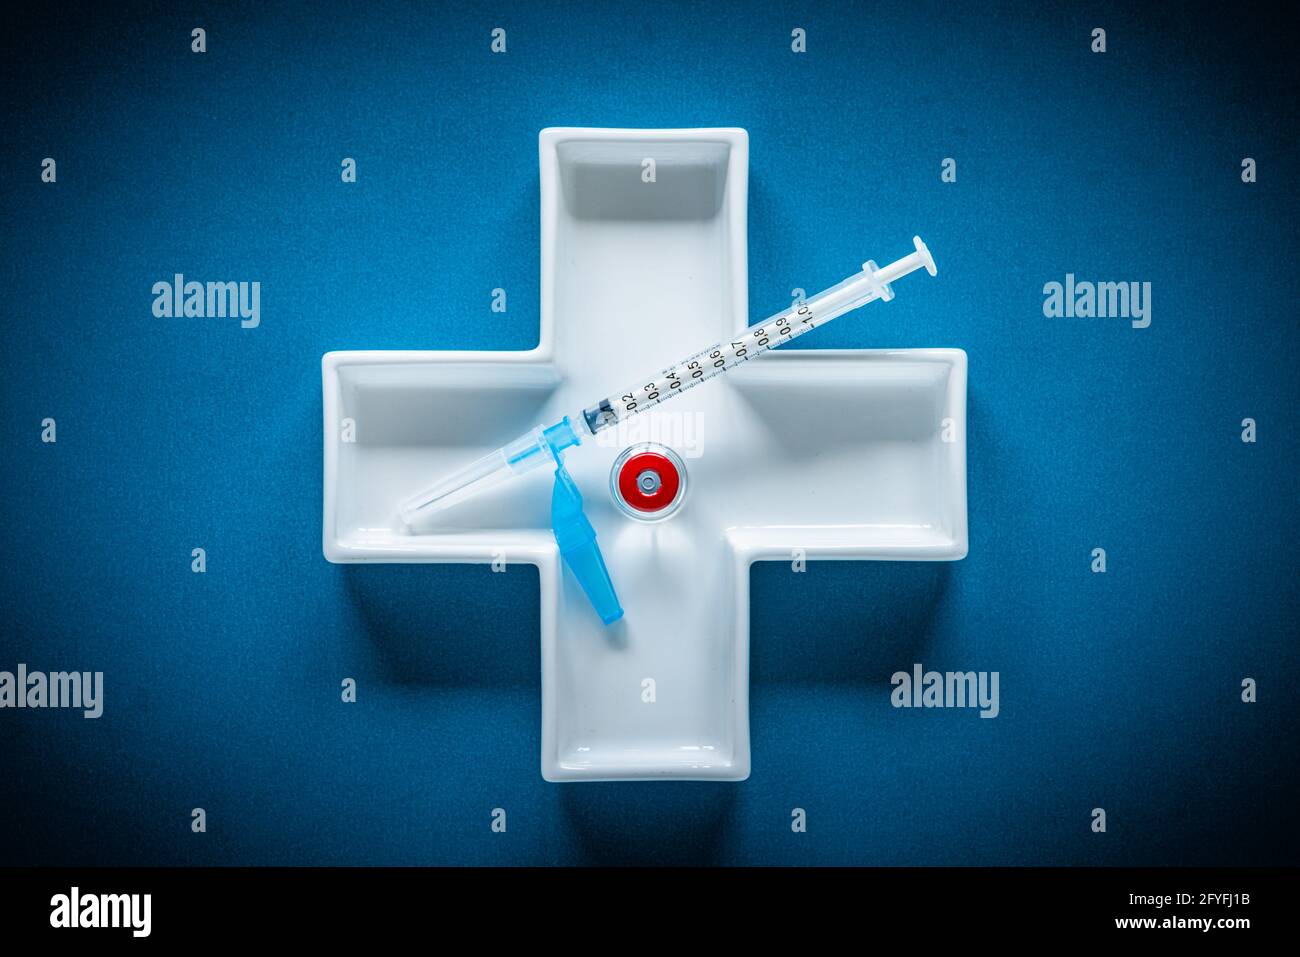 Illustration about vaccination. Stock Photo